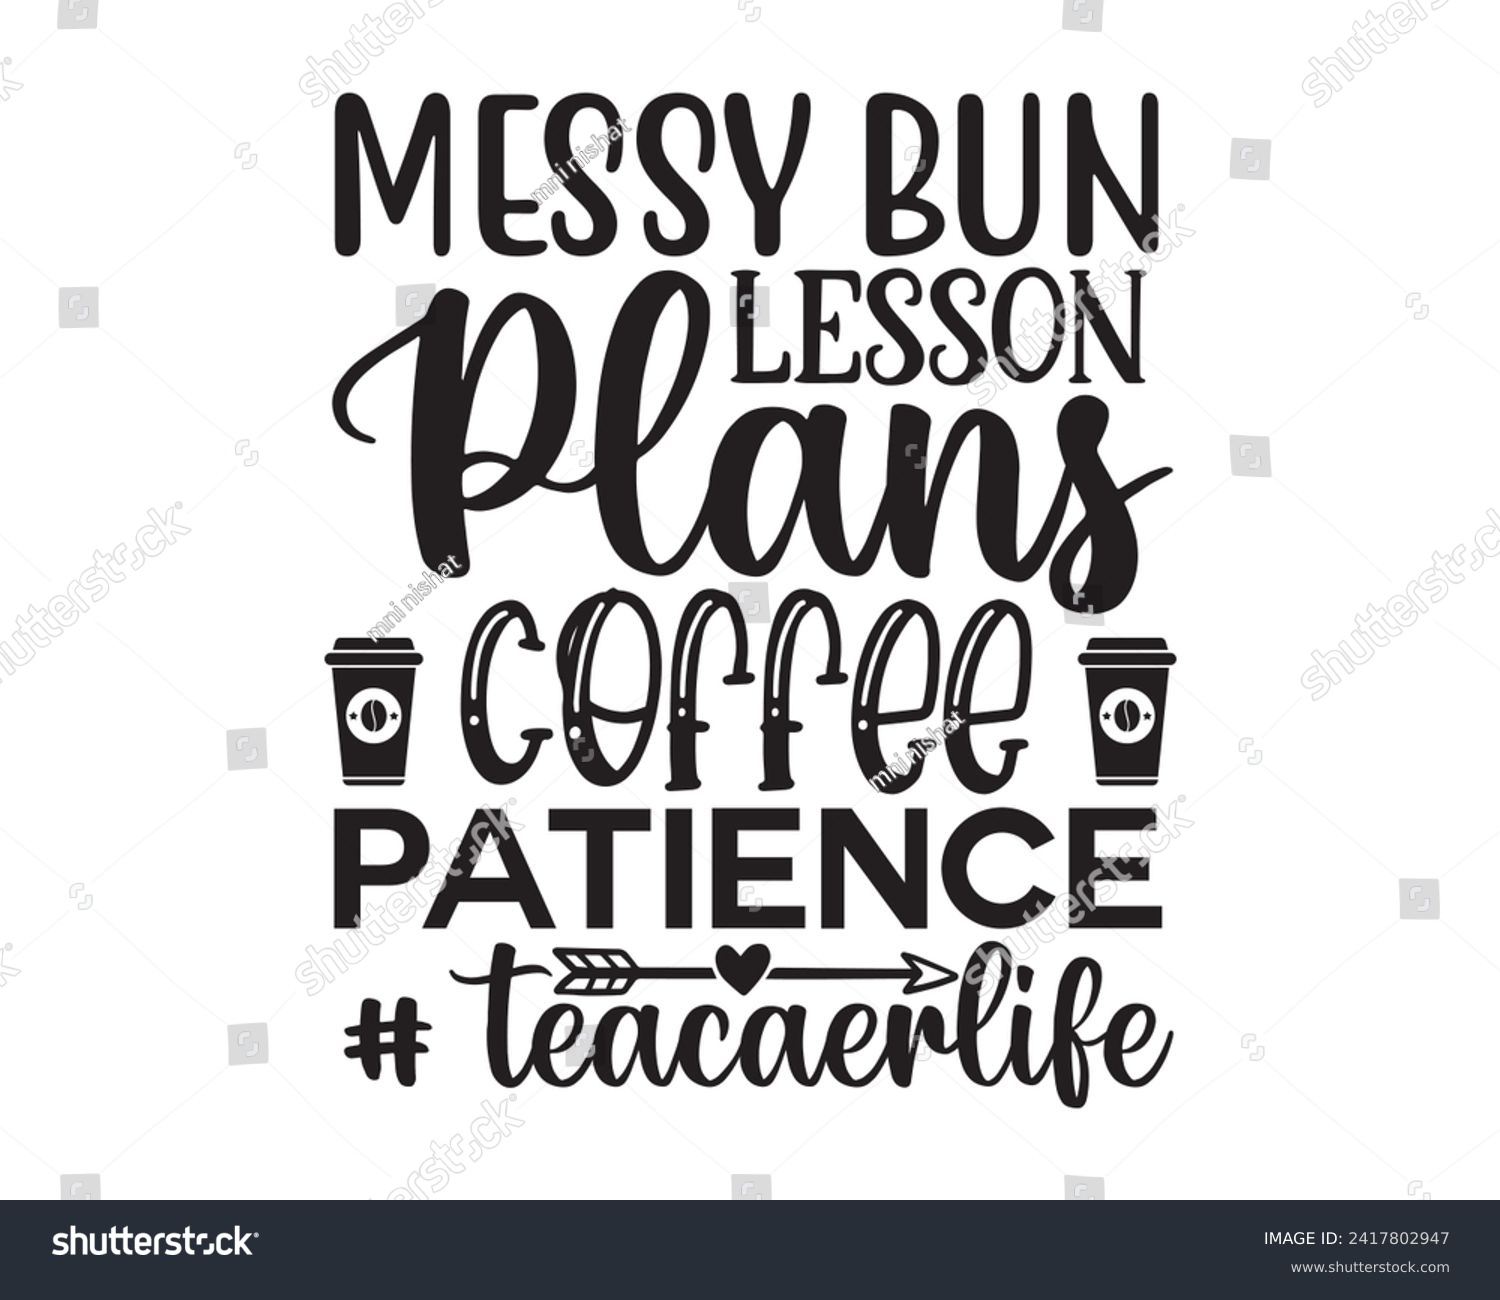 SVG of messy bun lesson plans coffee patience # teacaerlife svg